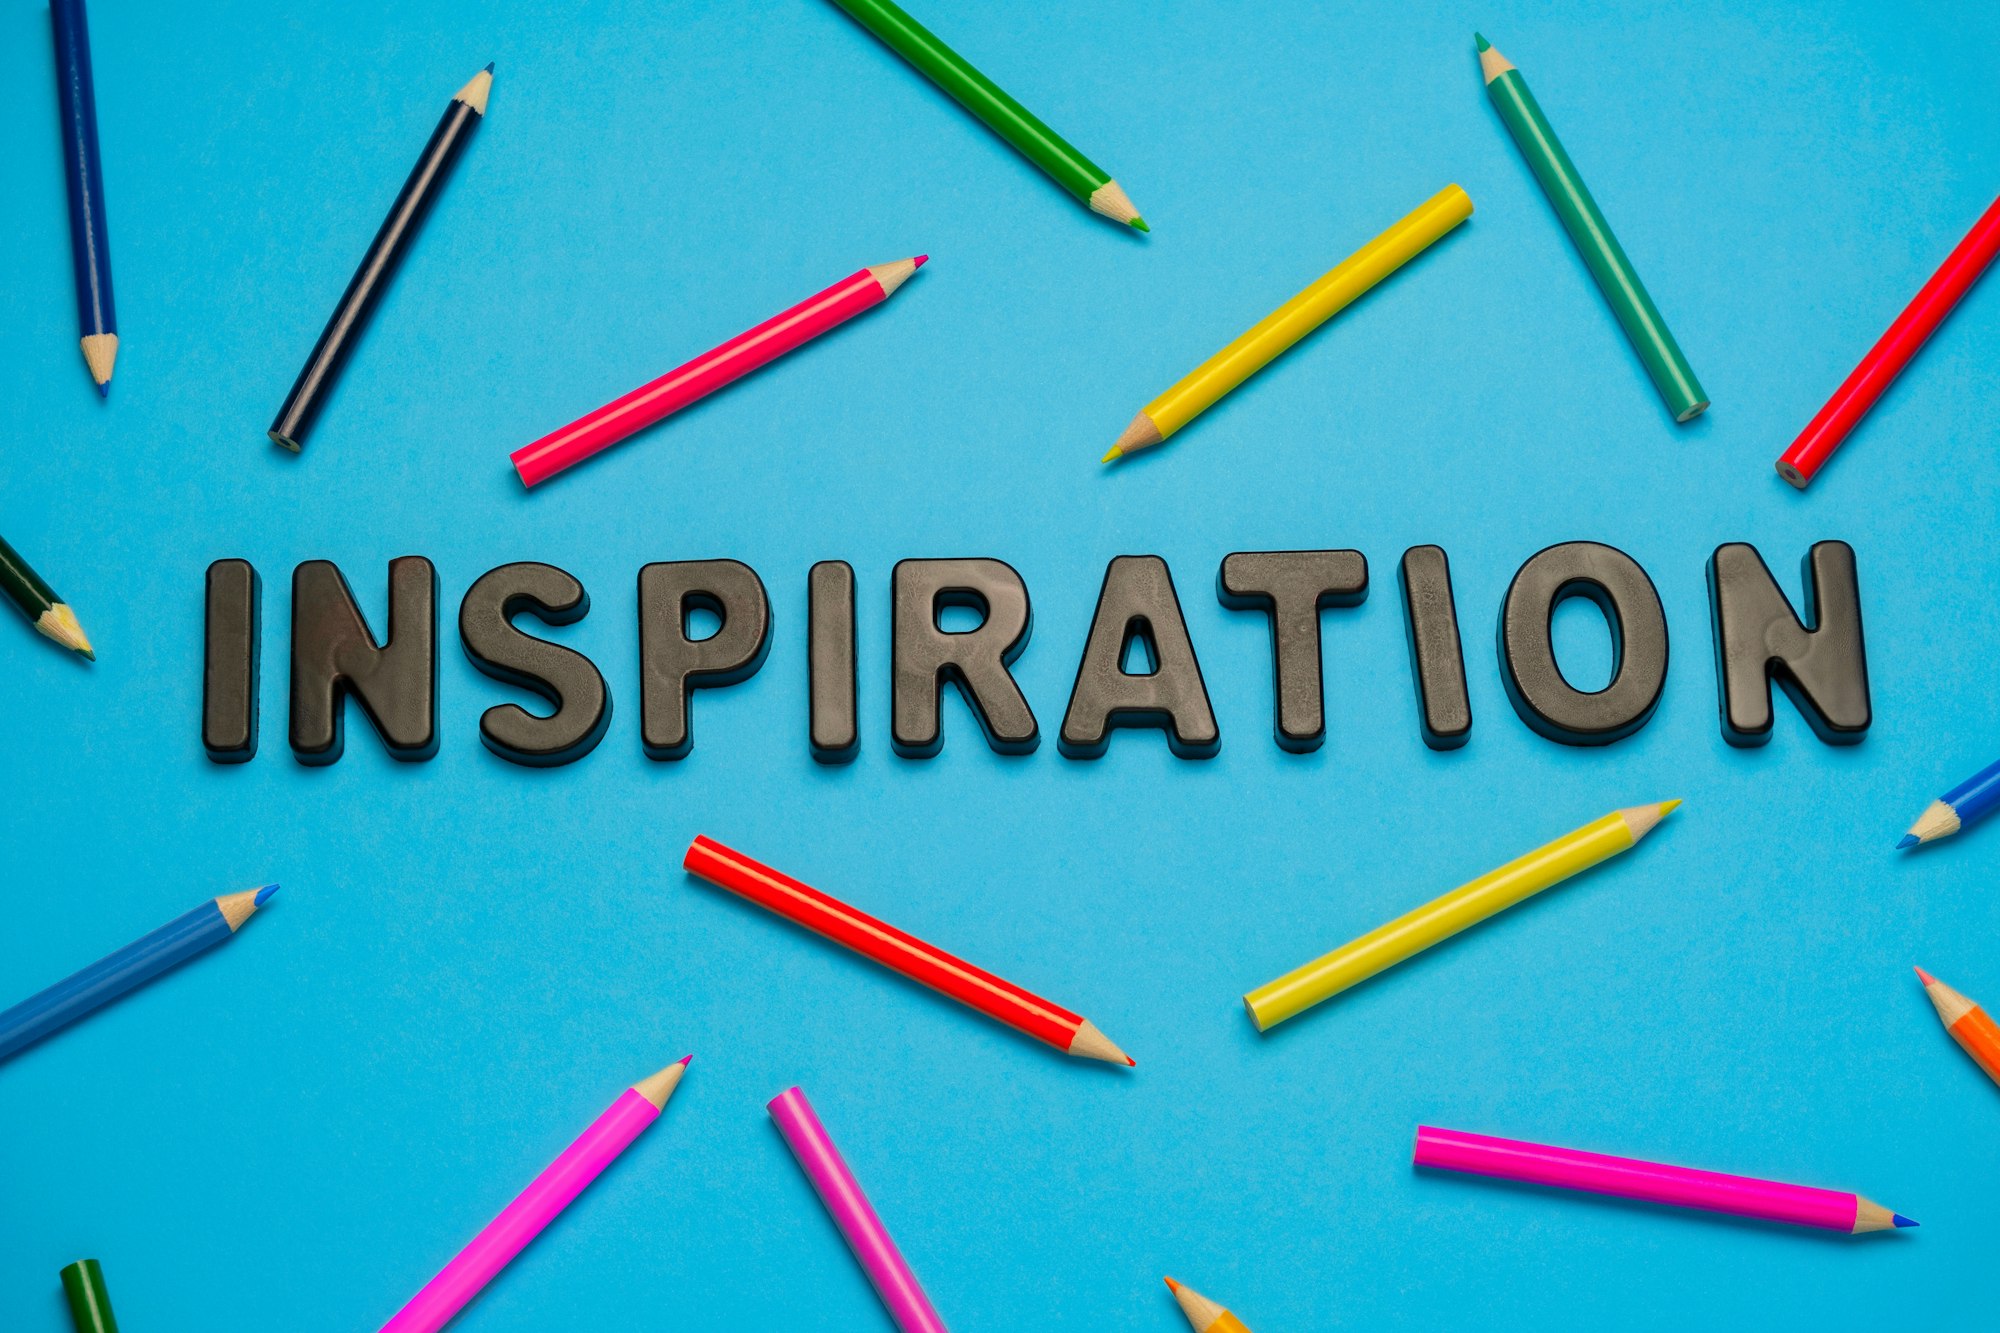 The word Inspiration with pencils around it.